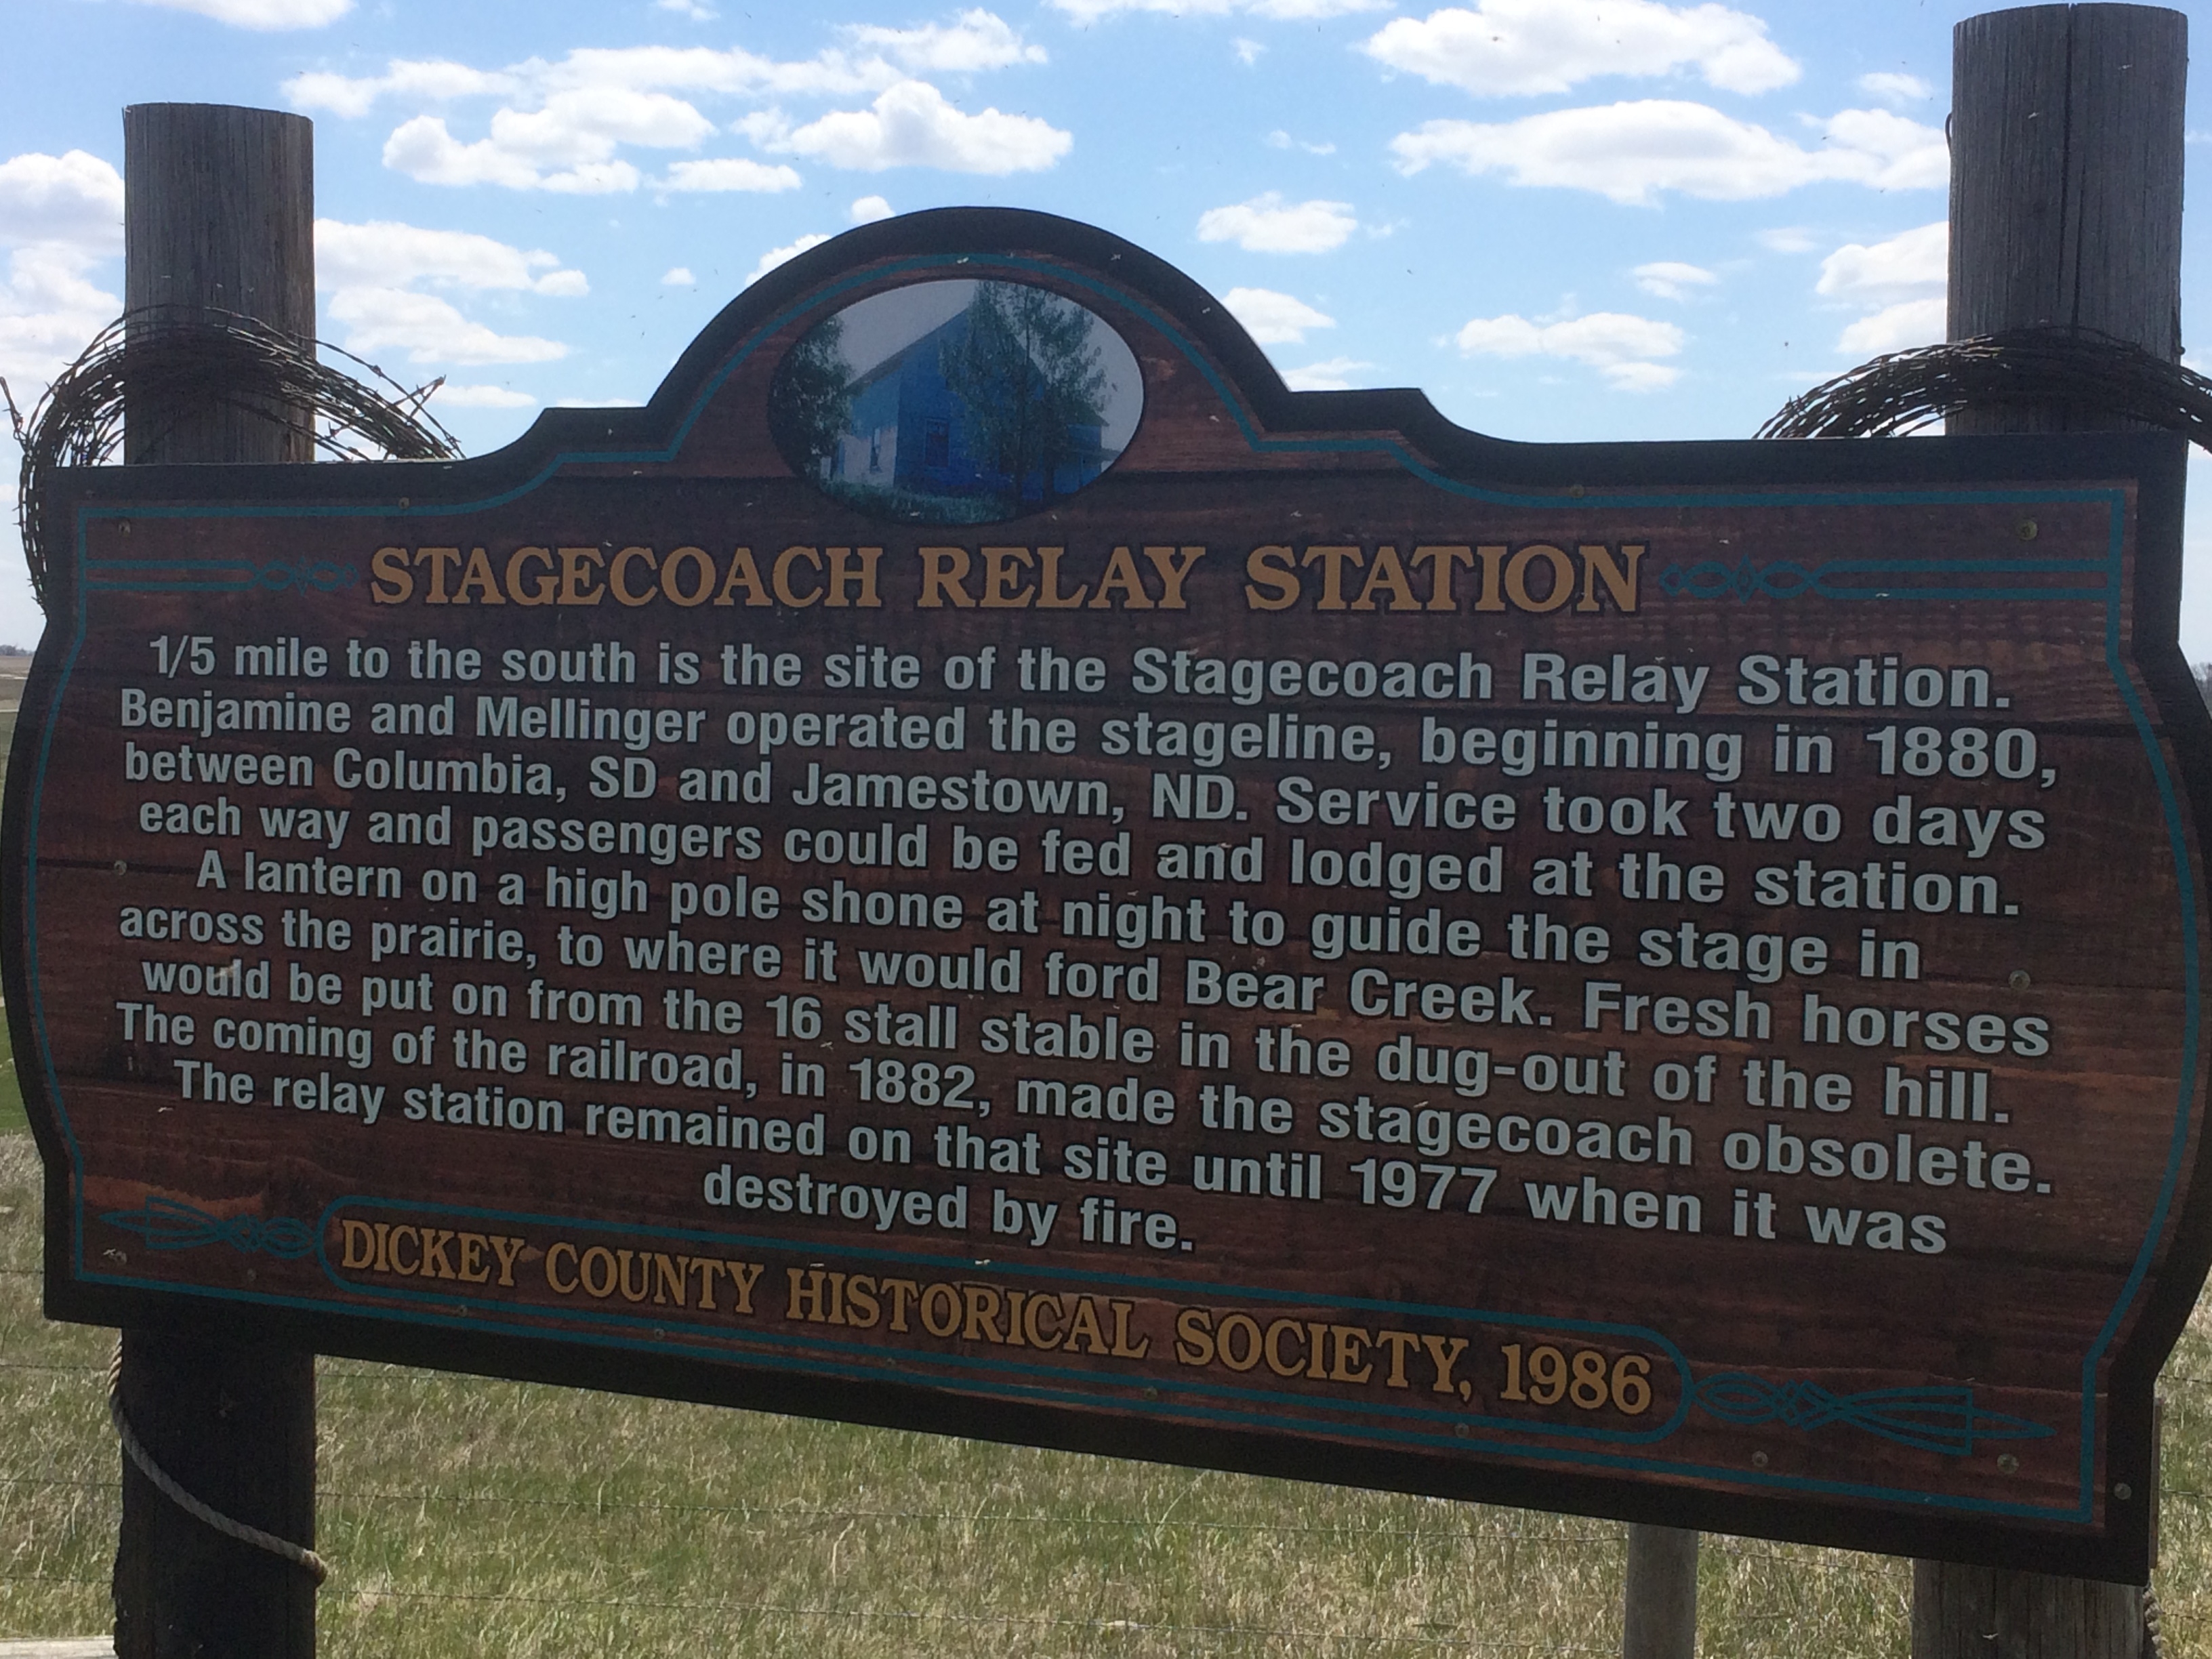 Stagecoach Relay Station Marker